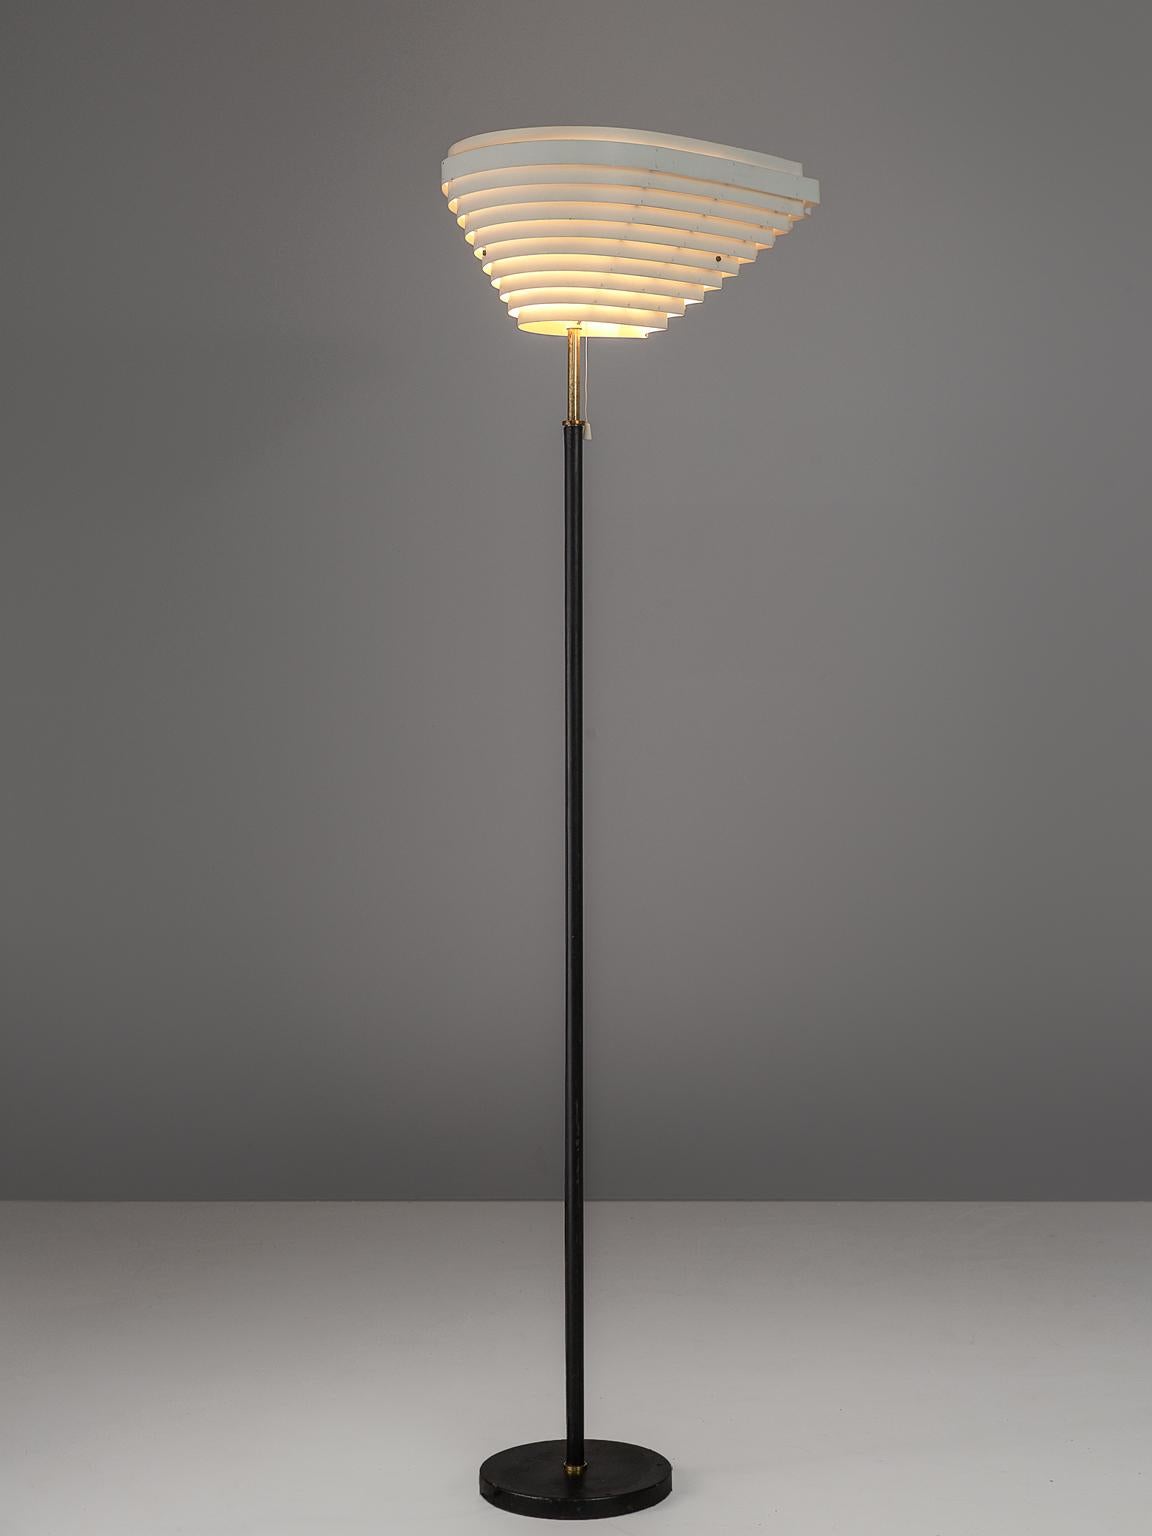 Alvar Aalto, floorlamp model A805 'Angel Wing', in metal, leather and brass, Finland, design 1954, production later. 

Early Angel Wing floor lamp by Alvar Aalto. Originally designed for the National Pensions Institute in Helsinki. The louvered